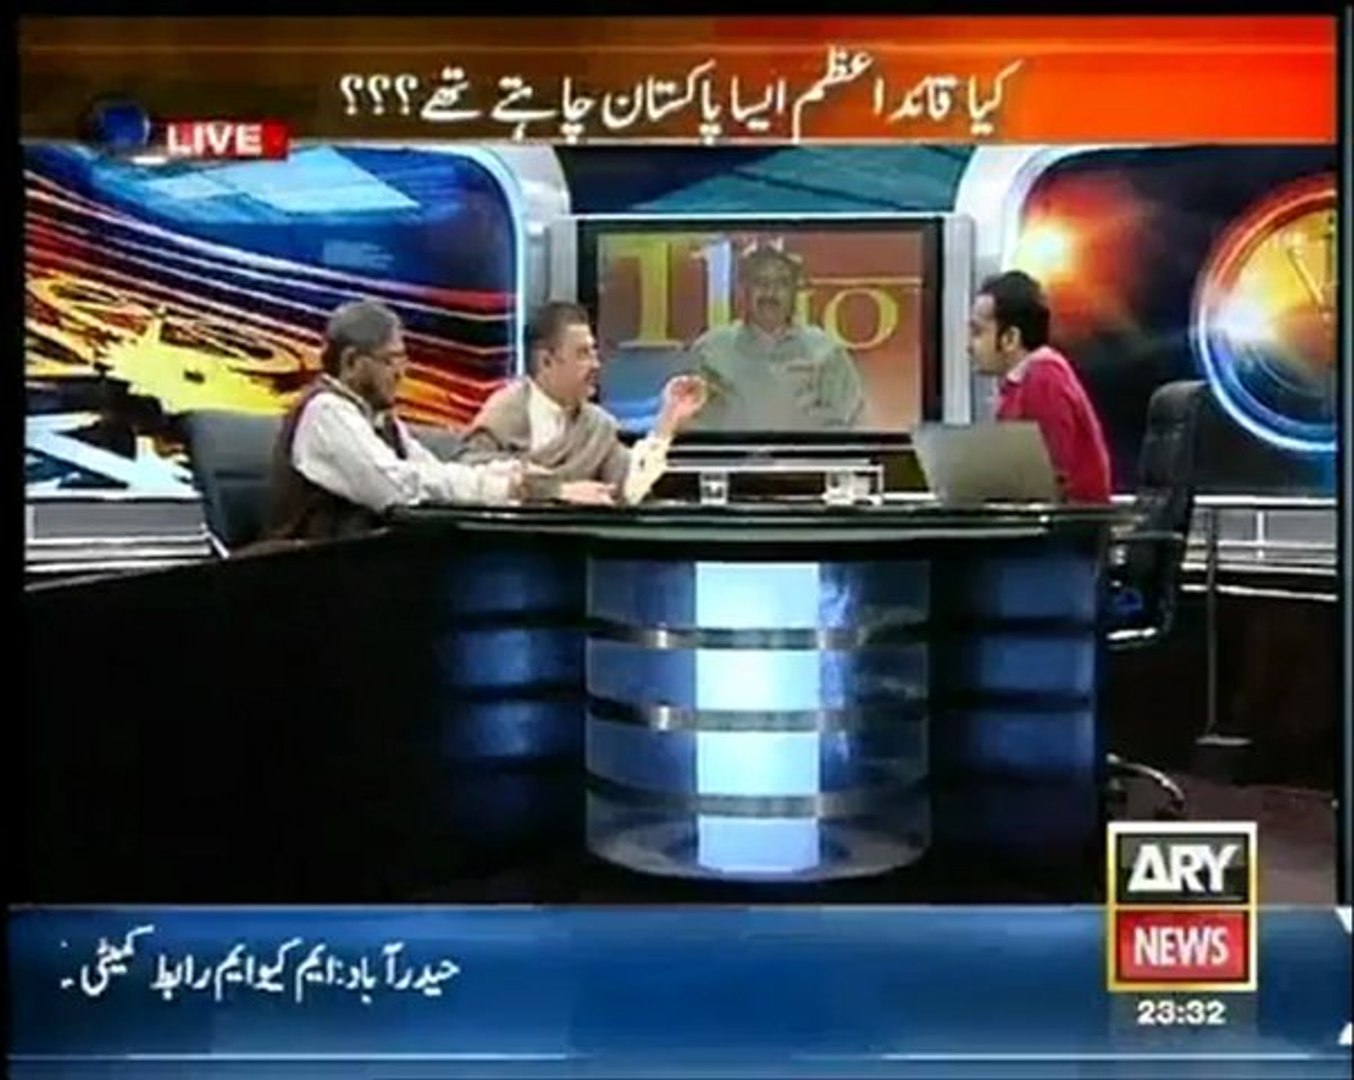 11th Hour - 25 Dec 2012 - ARY News, Watch Latest Episode